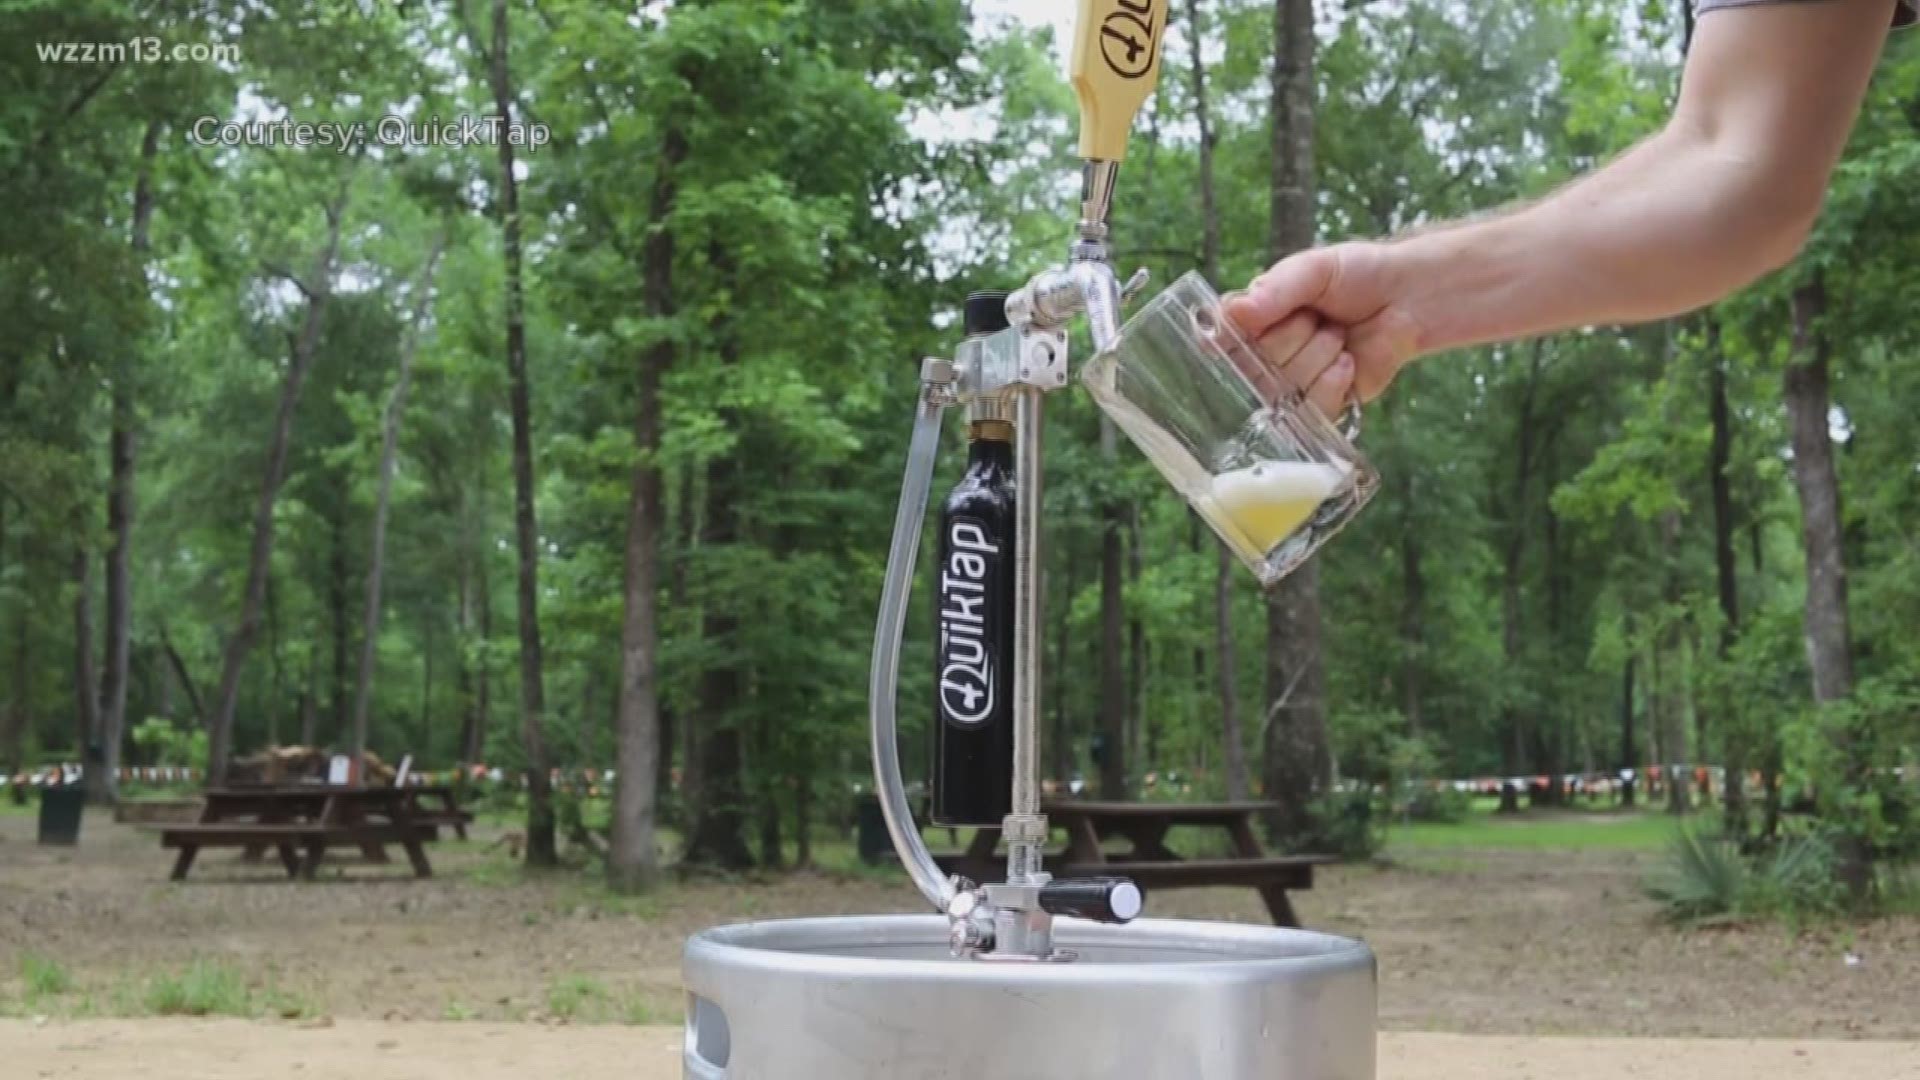 A Grand Rapids entrepreneur is tapping into the global beverage industry by bringing a new level of portability. The QuikTap, a portable CO2 keg tap, promises an alternative to traditional keg systems by dispensing beverages “from keg to cup.”